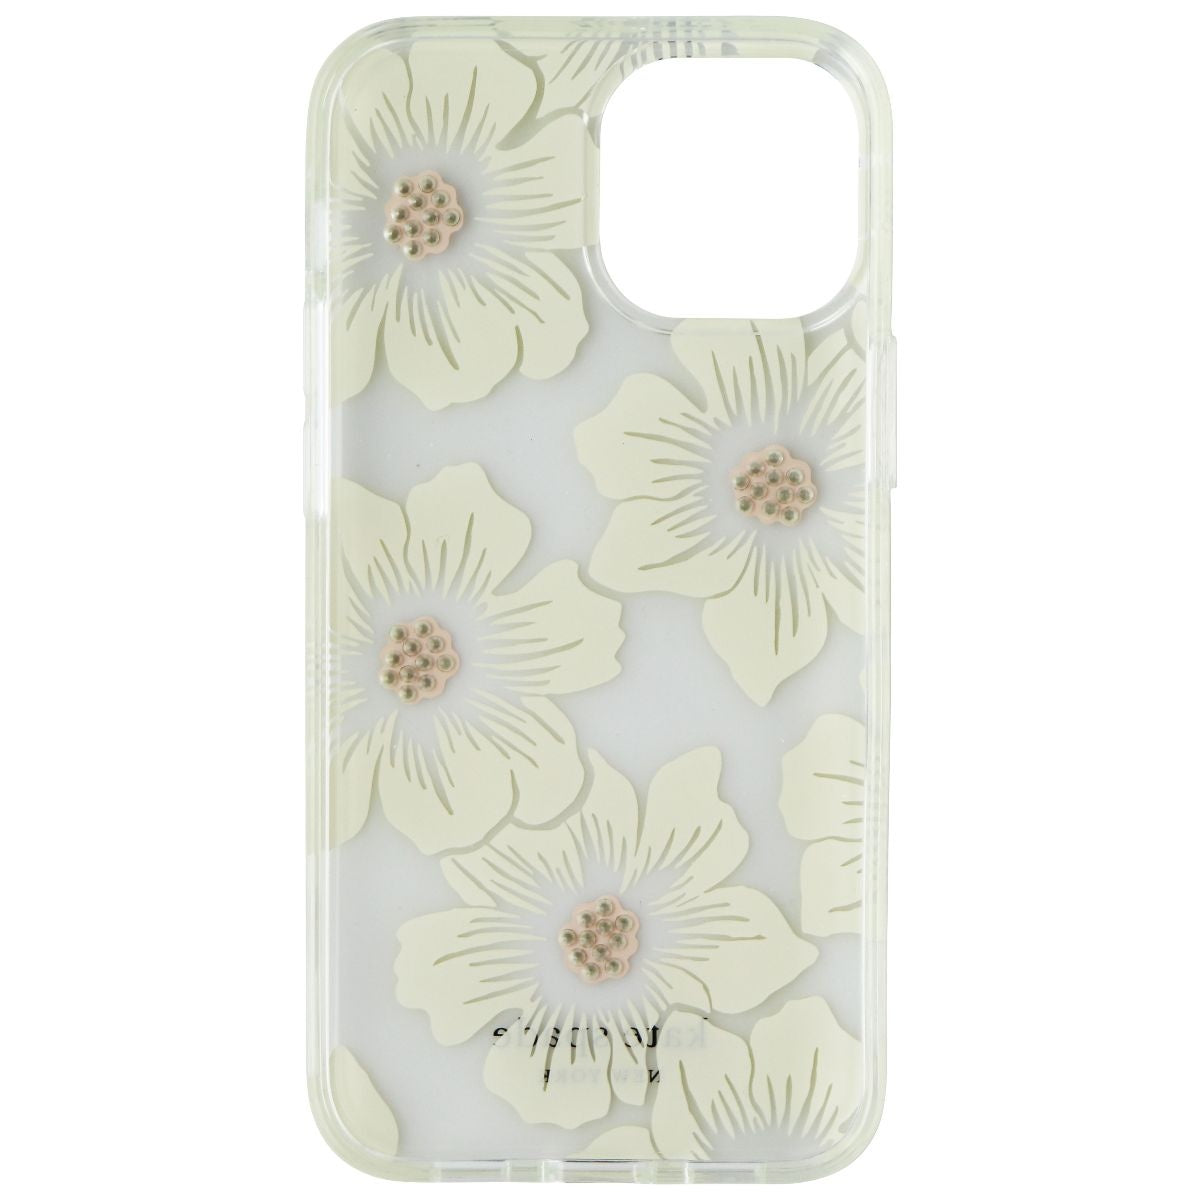 Kate Spade Protective Hardshell Case for iPhone 13 mini - Hollyhock Floral Clear Cell Phone - Cases, Covers & Skins Kate Spade    - Simple Cell Bulk Wholesale Pricing - USA Seller